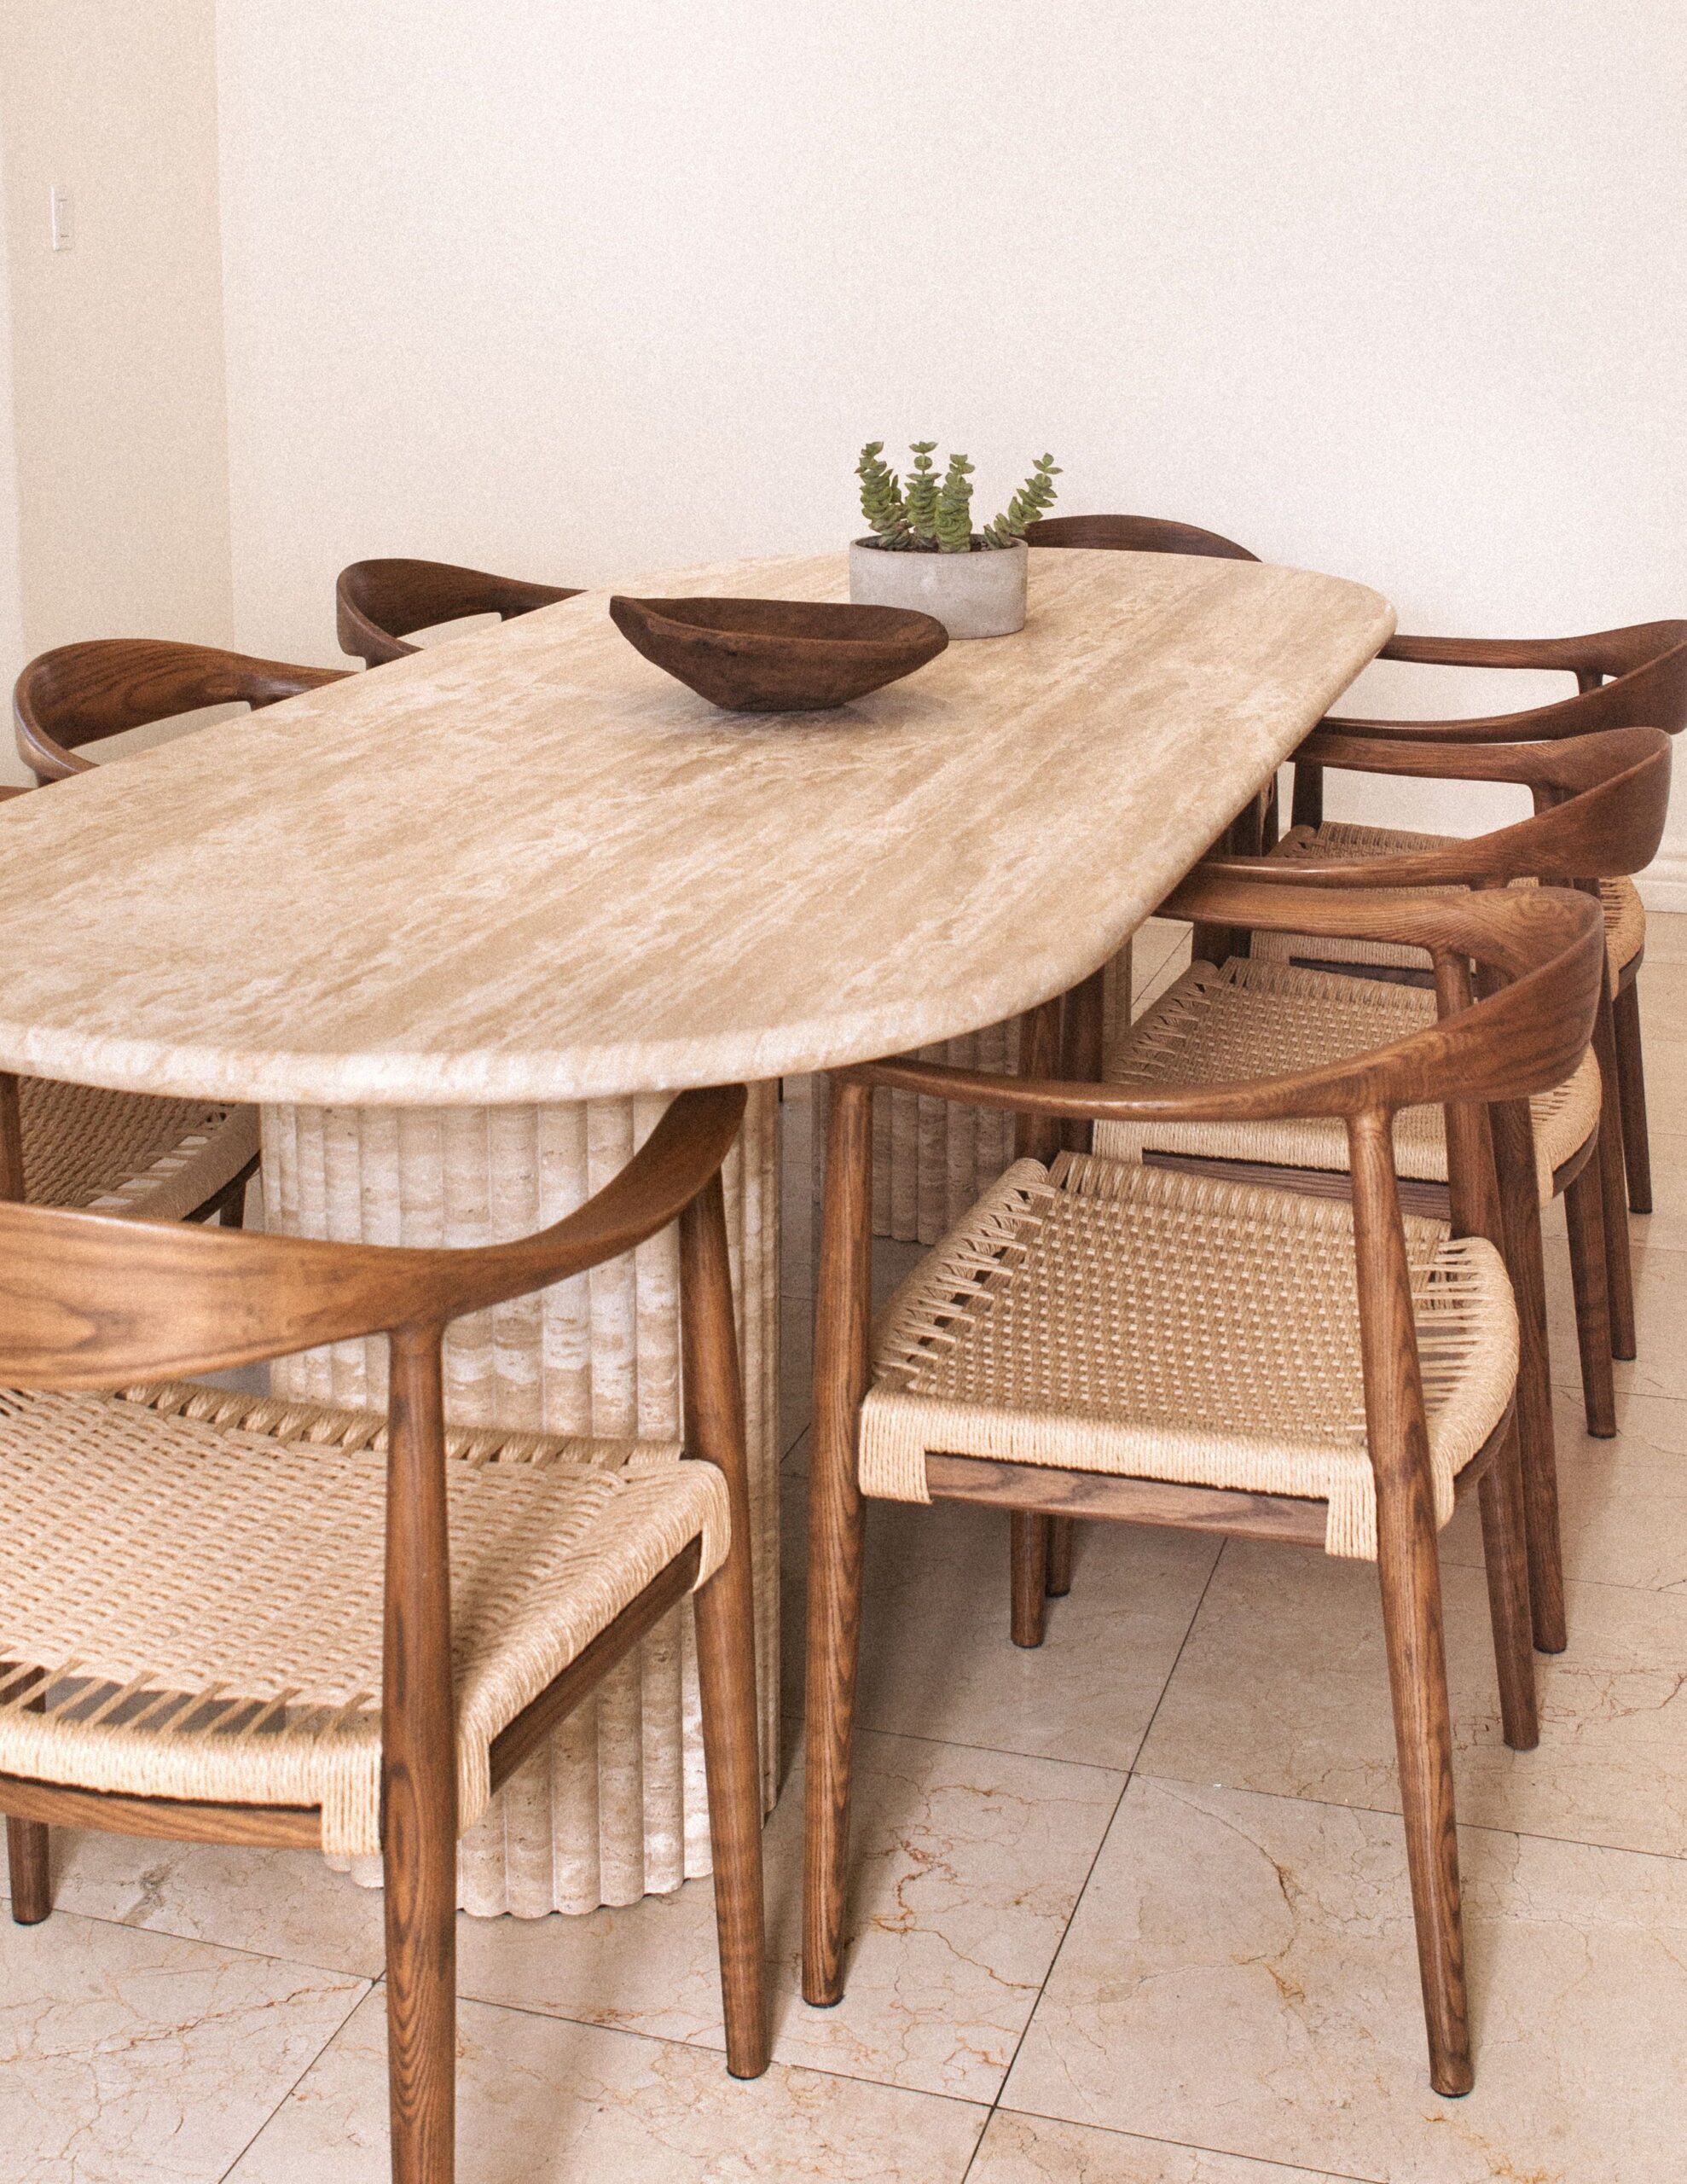 Dining Table Chairs: Stylish and Functional Seating Solutions for Your Dining Area